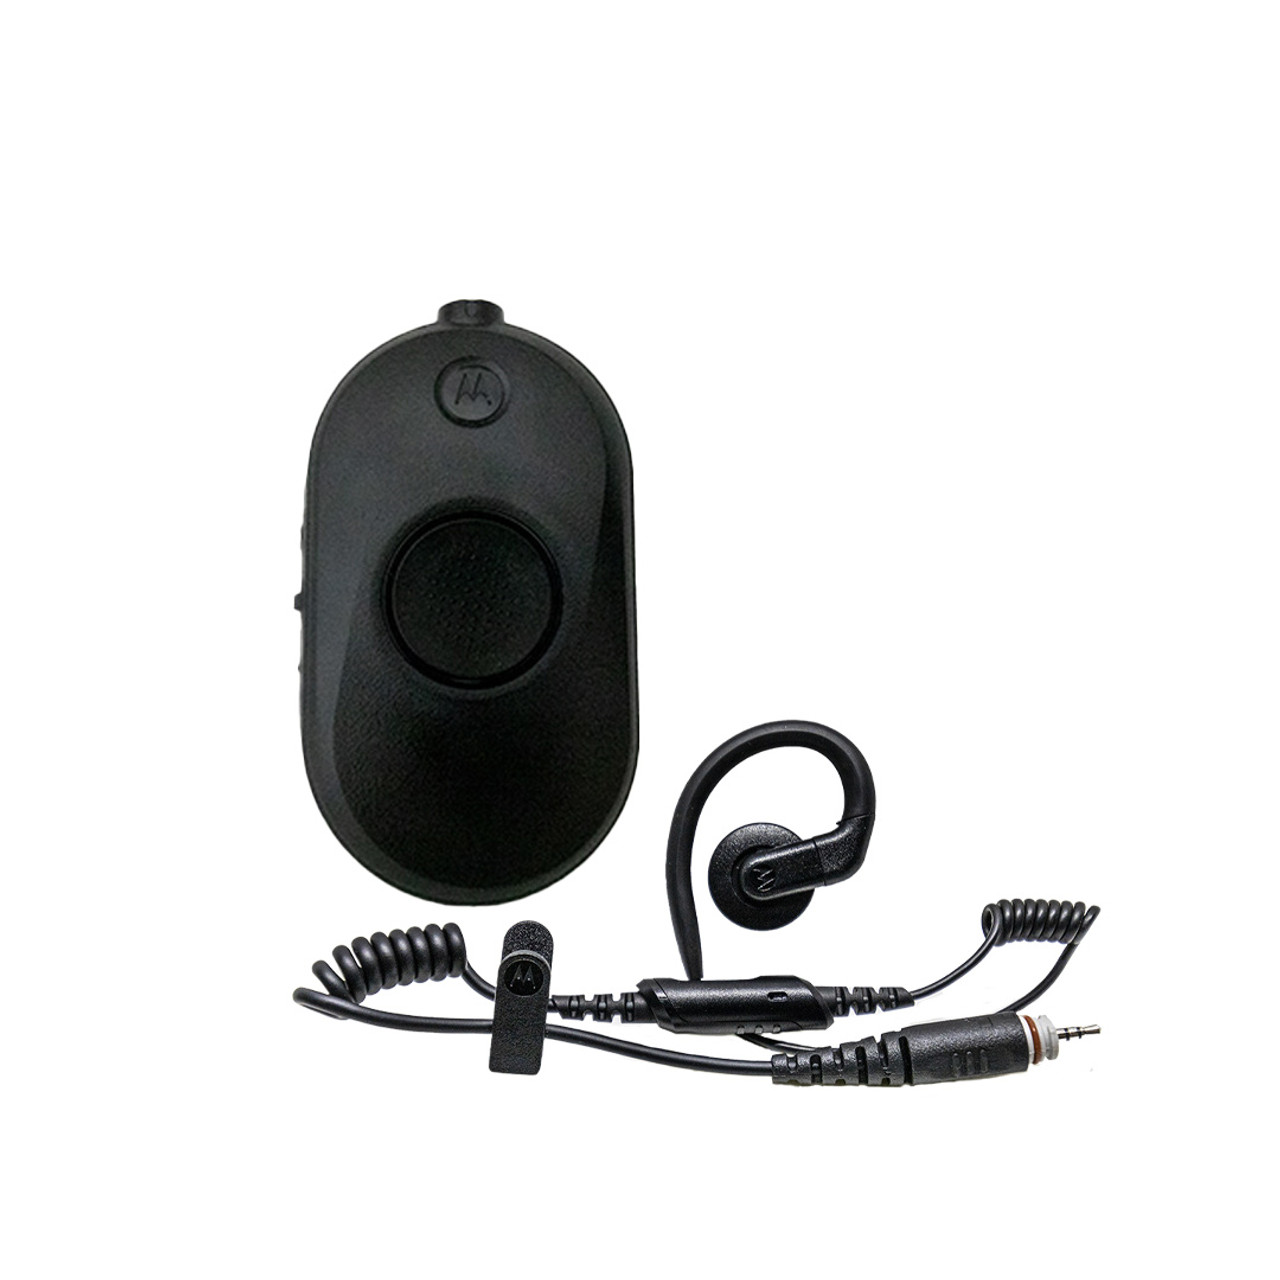 Motorola CLP1080e Two Way Radio with Free Headset For Restaurants, Retail,  or Medical Businesses